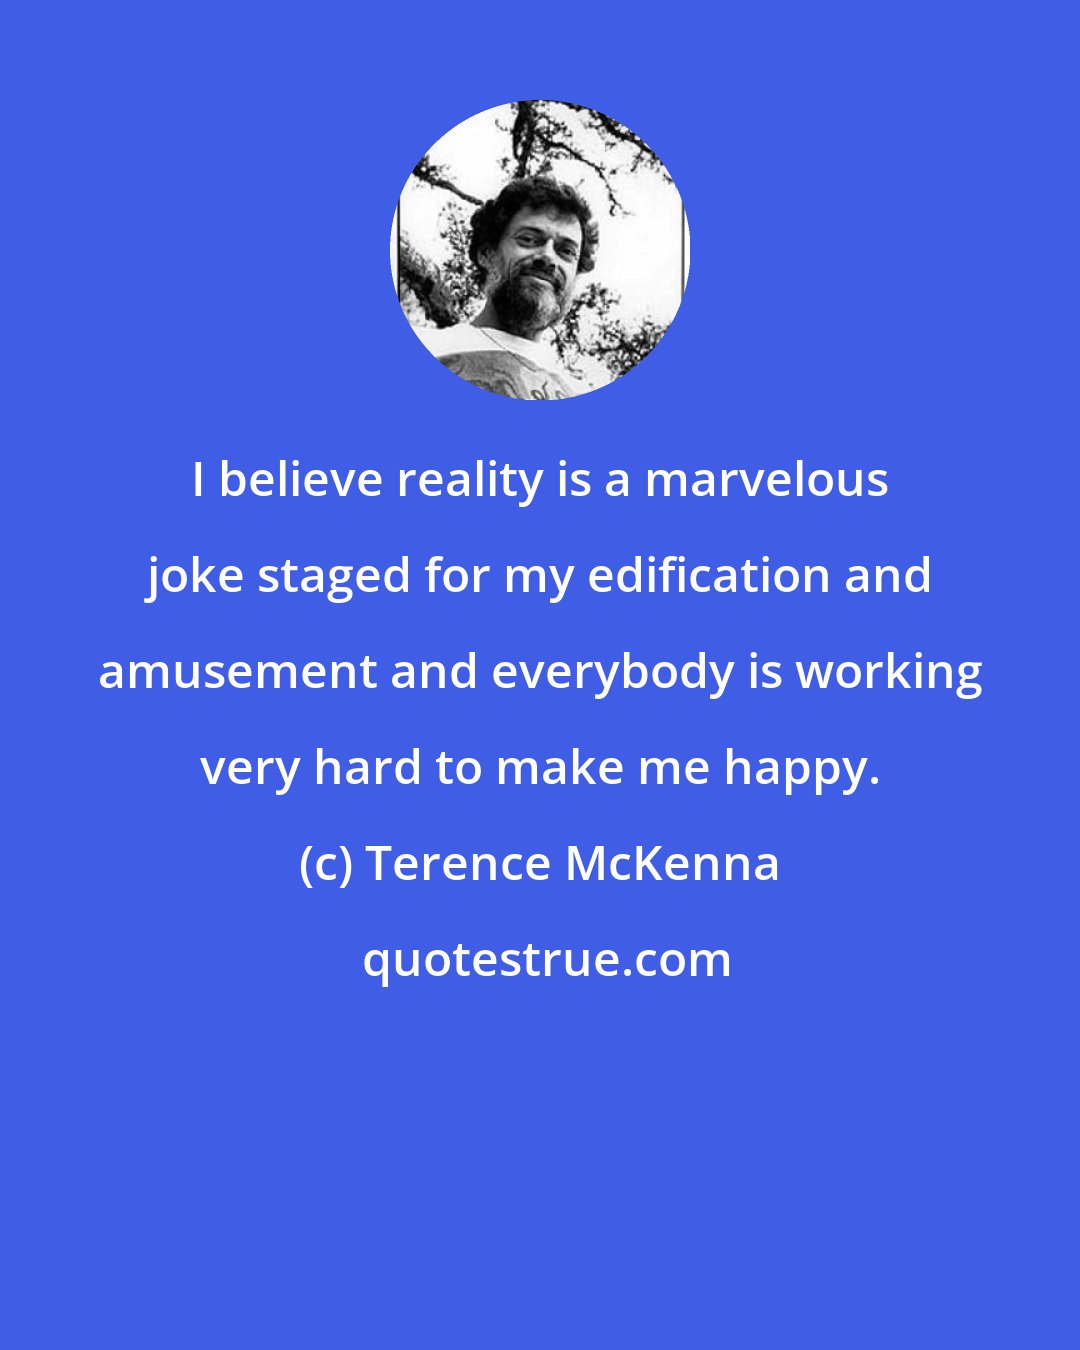 Terence McKenna: I believe reality is a marvelous joke staged for my edification and amusement and everybody is working very hard to make me happy.